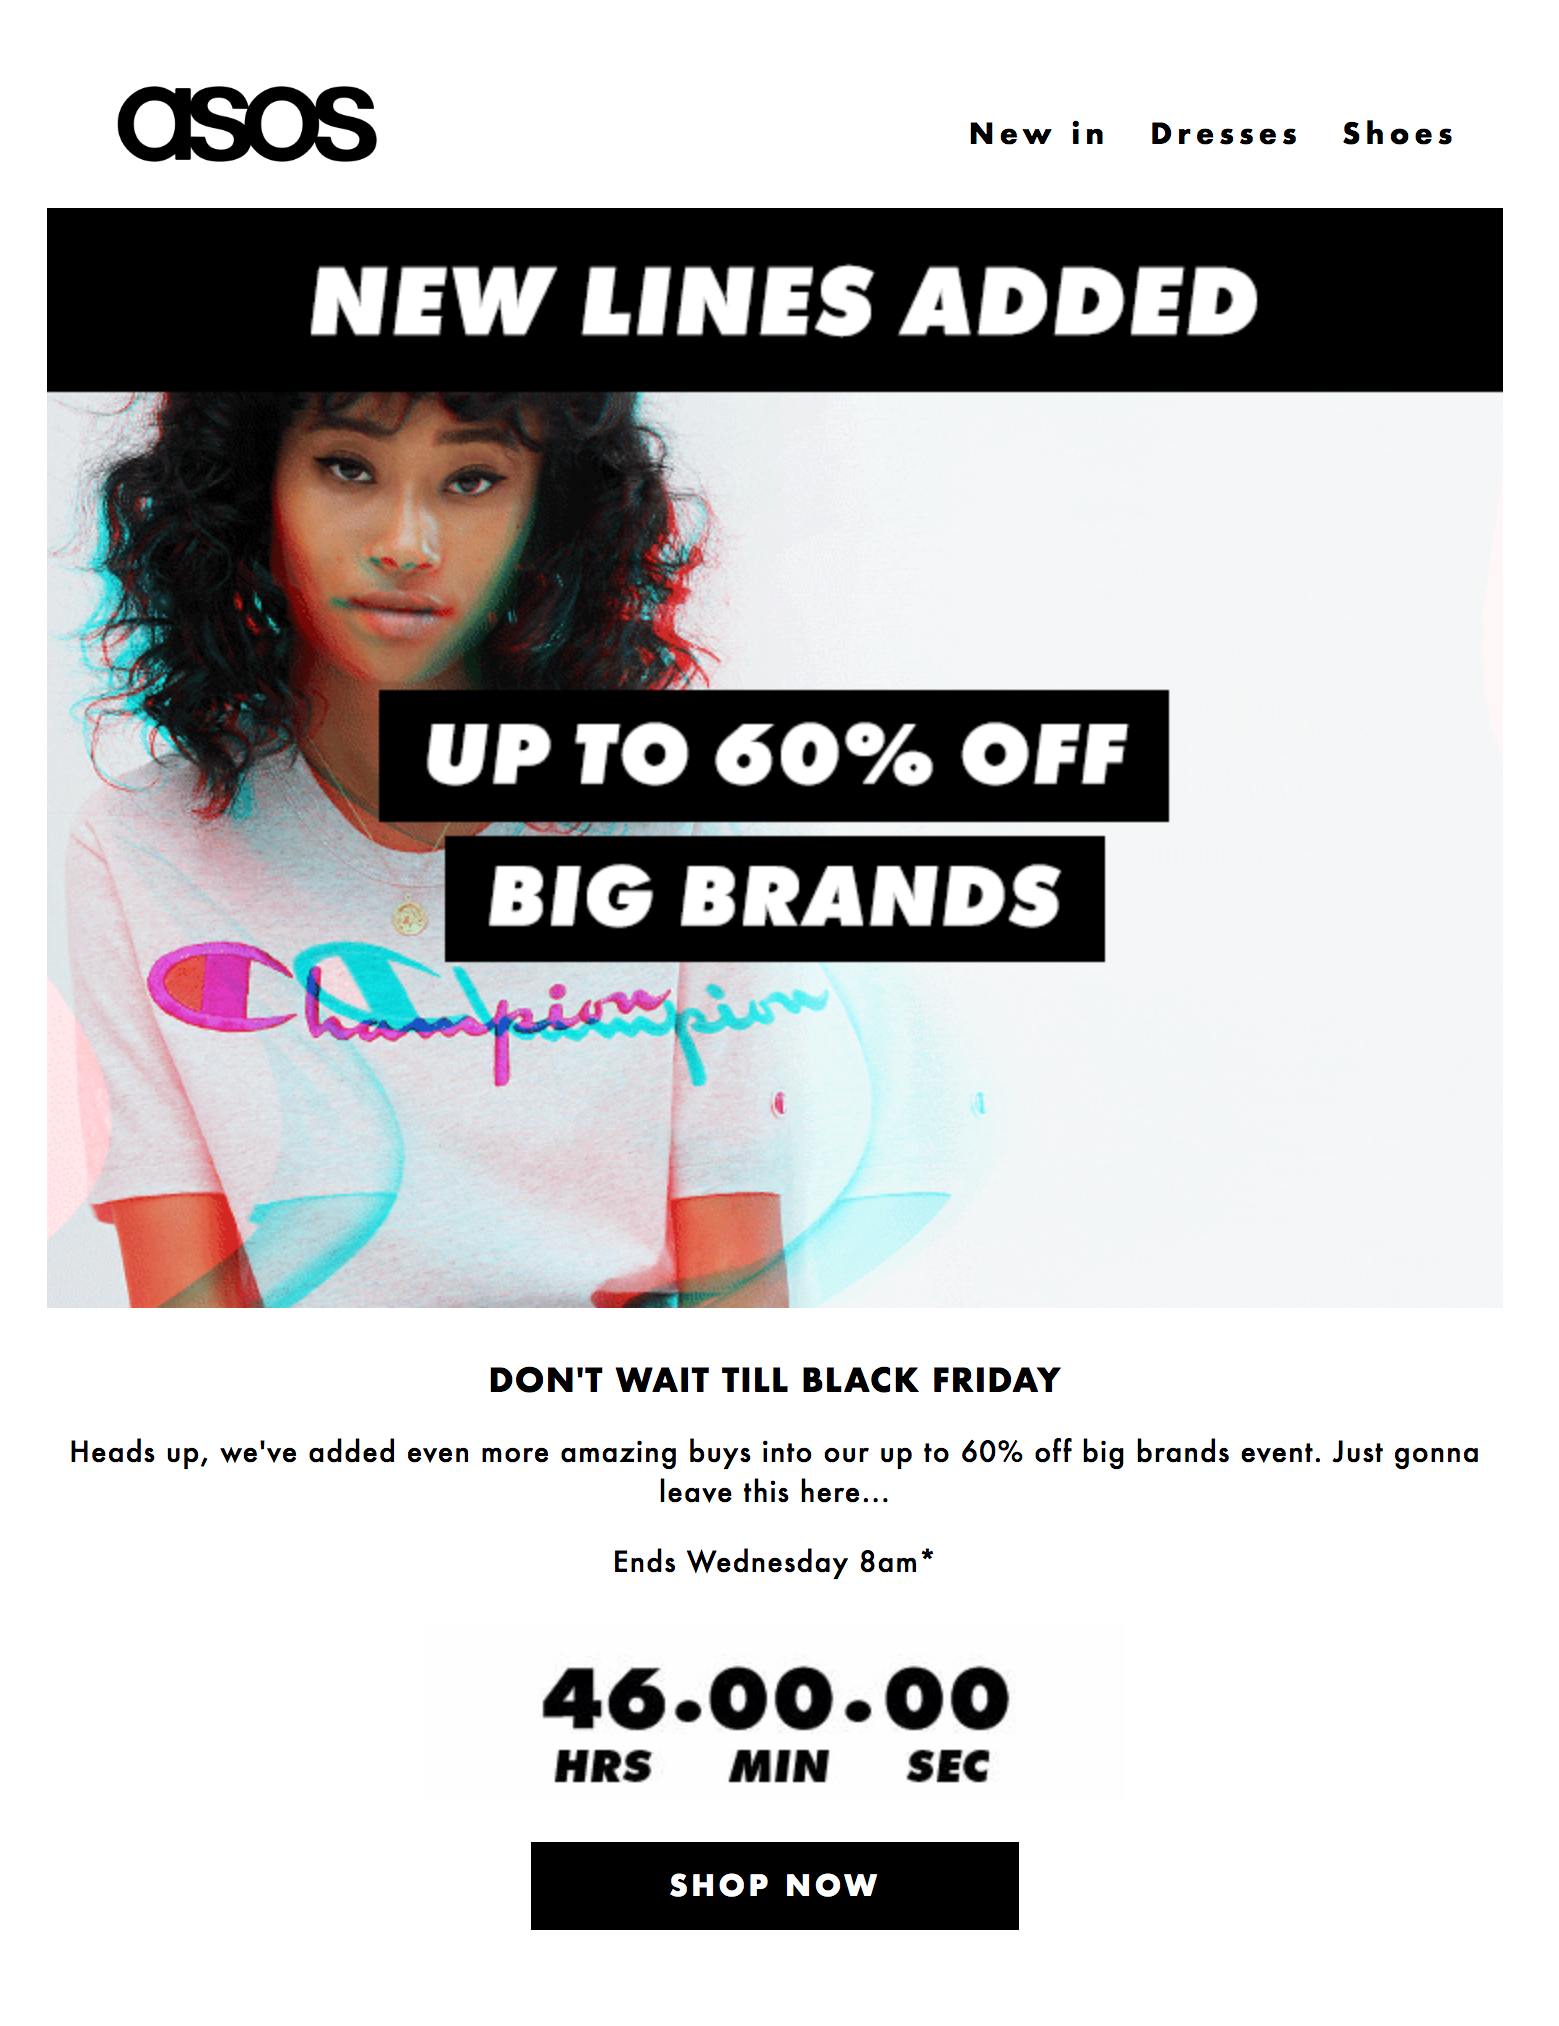 Black Friday Email Marketing - Content Inspiration from Kickdynamic